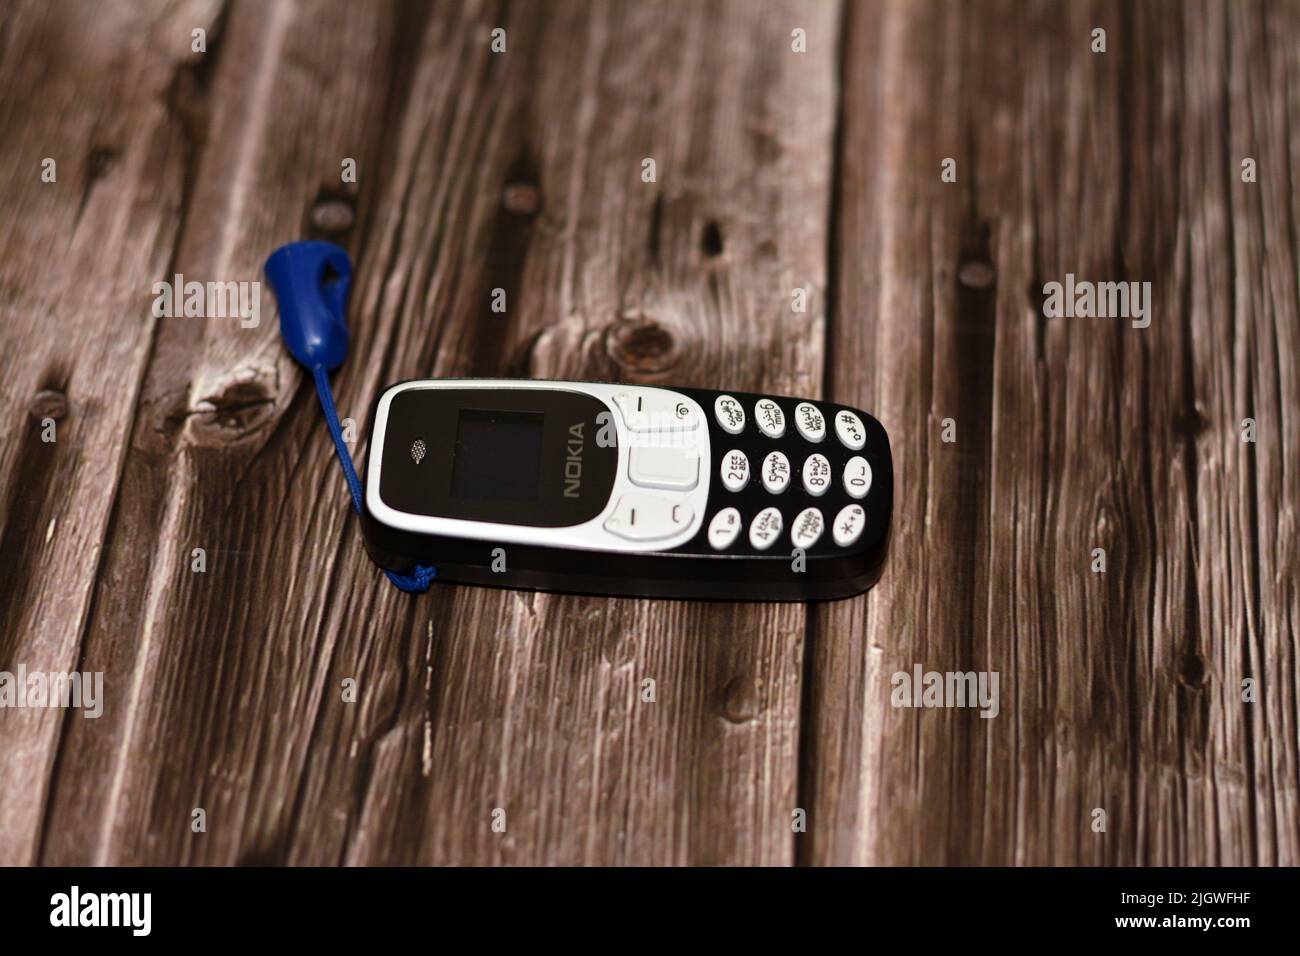 Cairo, Egypt, June 11 2022: A tiny small mini Nokia cell phone, an old classic smart small sized phone with a classic keypad and regular screen isolat Stock Photo